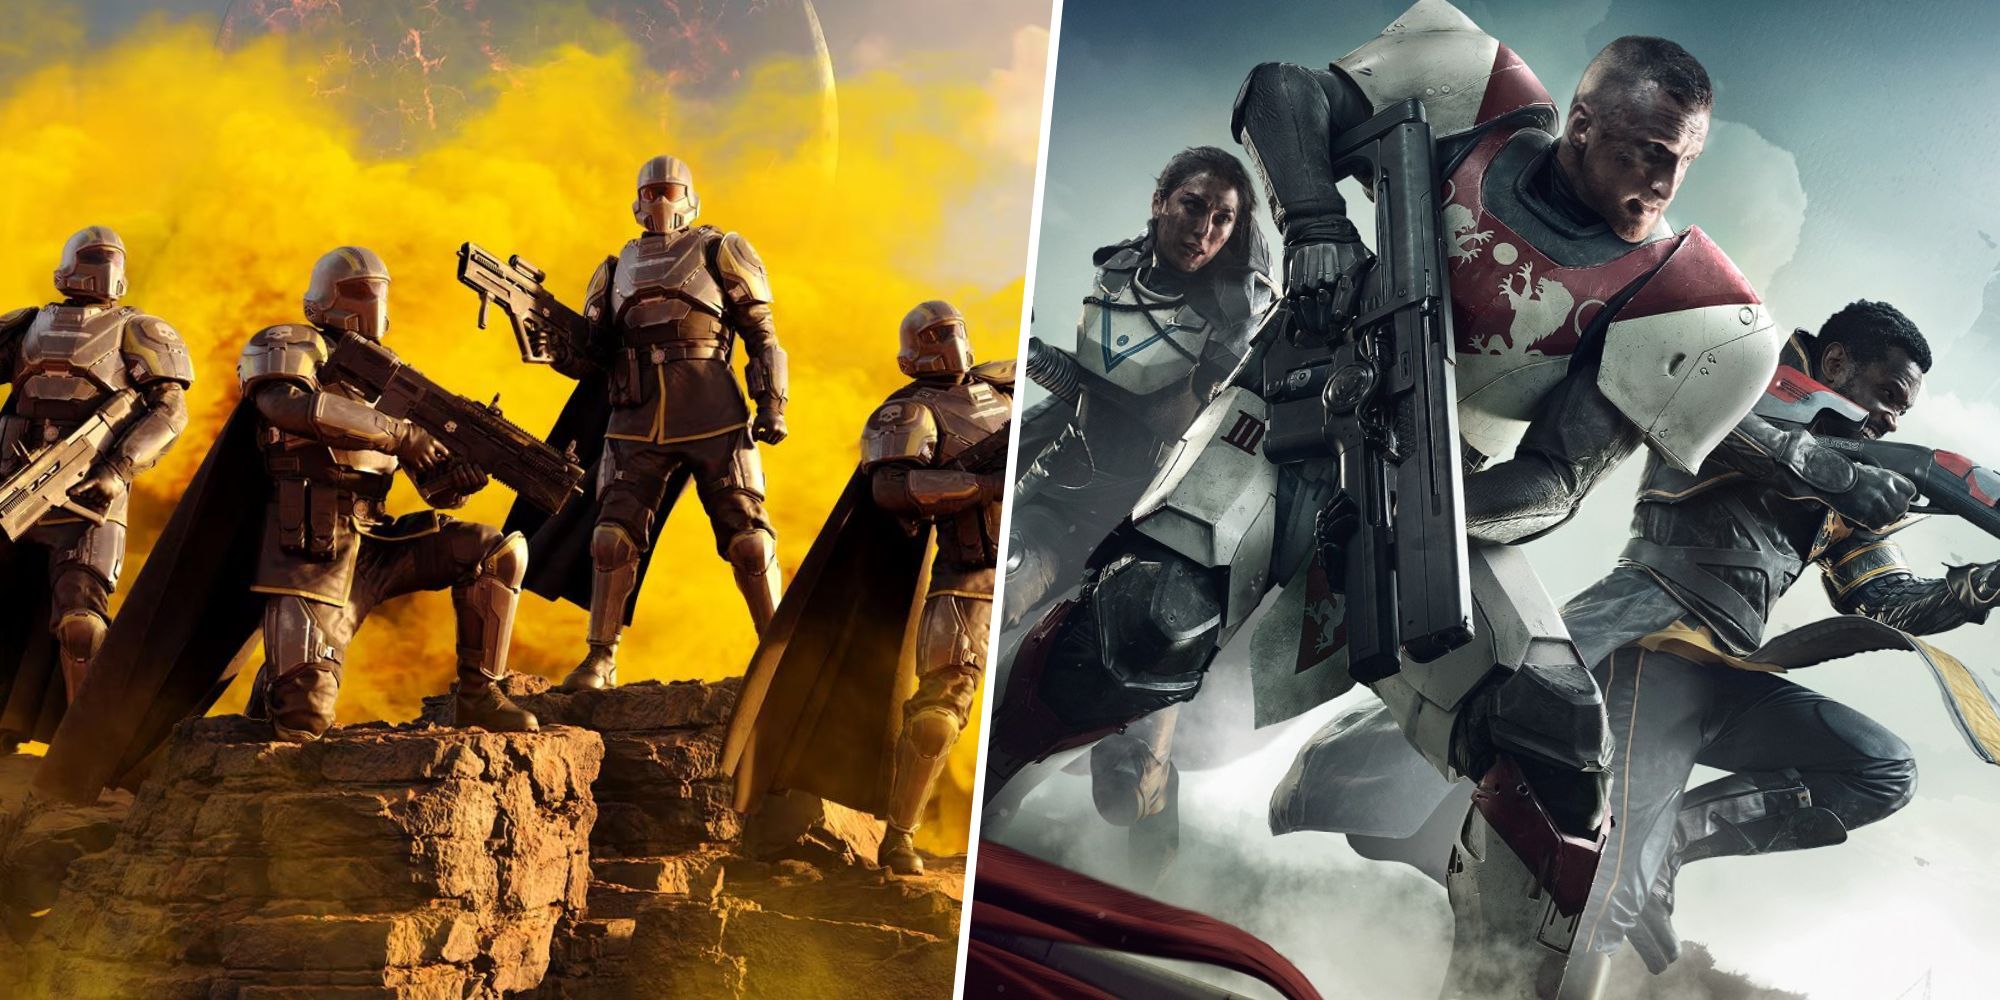 Right: cover art for Helldivers. Left: Cover art for Destiny. Both feature sci-fi soldiers wiedling guns. 